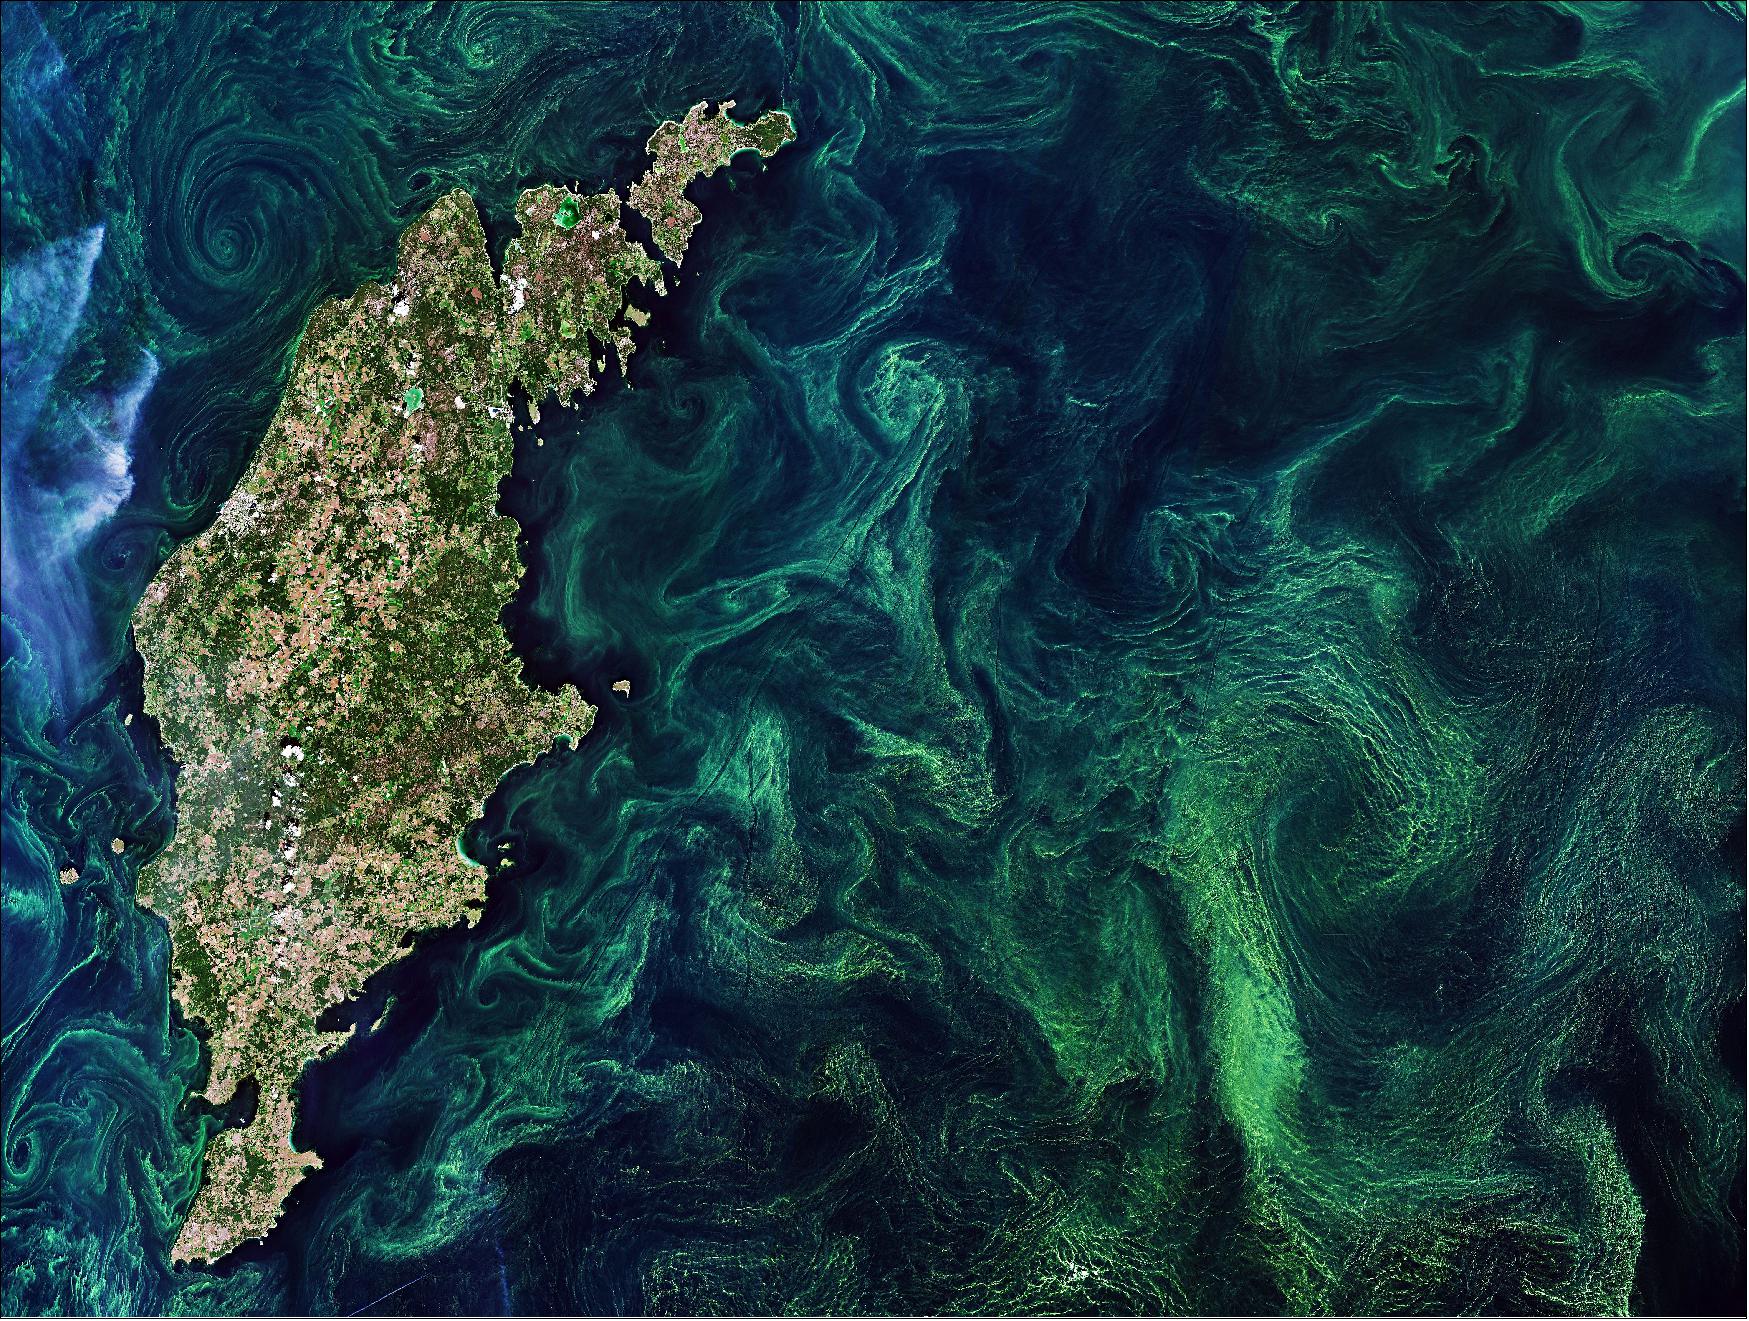 Figure 2: In this image captured on 20 July 2019, the streaks, eddies and whirls of the late summer blooms, mixed by winds and currents, are clearly visible. Without in situ measurements, it is difficult to distinguish the type of algae that covers the sea as many different types of algae grow in these waters. The highest concentrations of algal blooms are said to occur in the Central Baltic and around the island of Gotland, visible to the left in the image. This image is also featured on the Earth from Space video program (image credit: ESA, the image contains modified Copernicus Sentinel data (2019), processed by ESA, CC BY-SA 3.0 IGO)